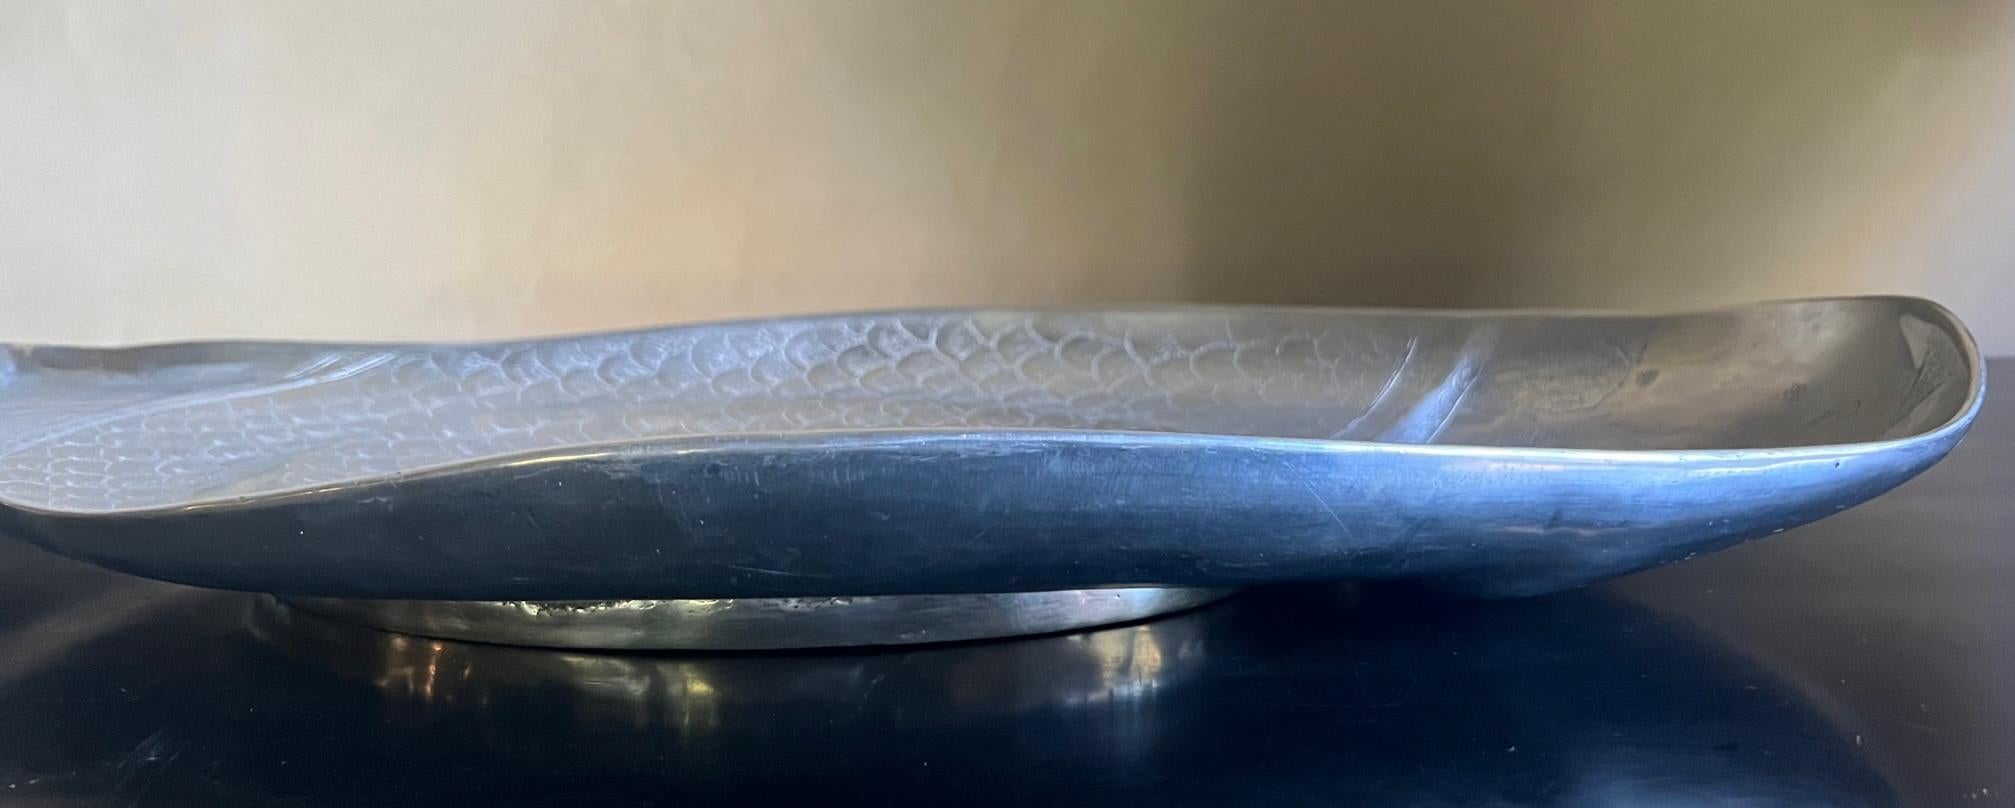 Large Vintage Arthur Court Aluminum Fish Platter with Black Stone Eye In Excellent Condition For Sale In Ross, CA